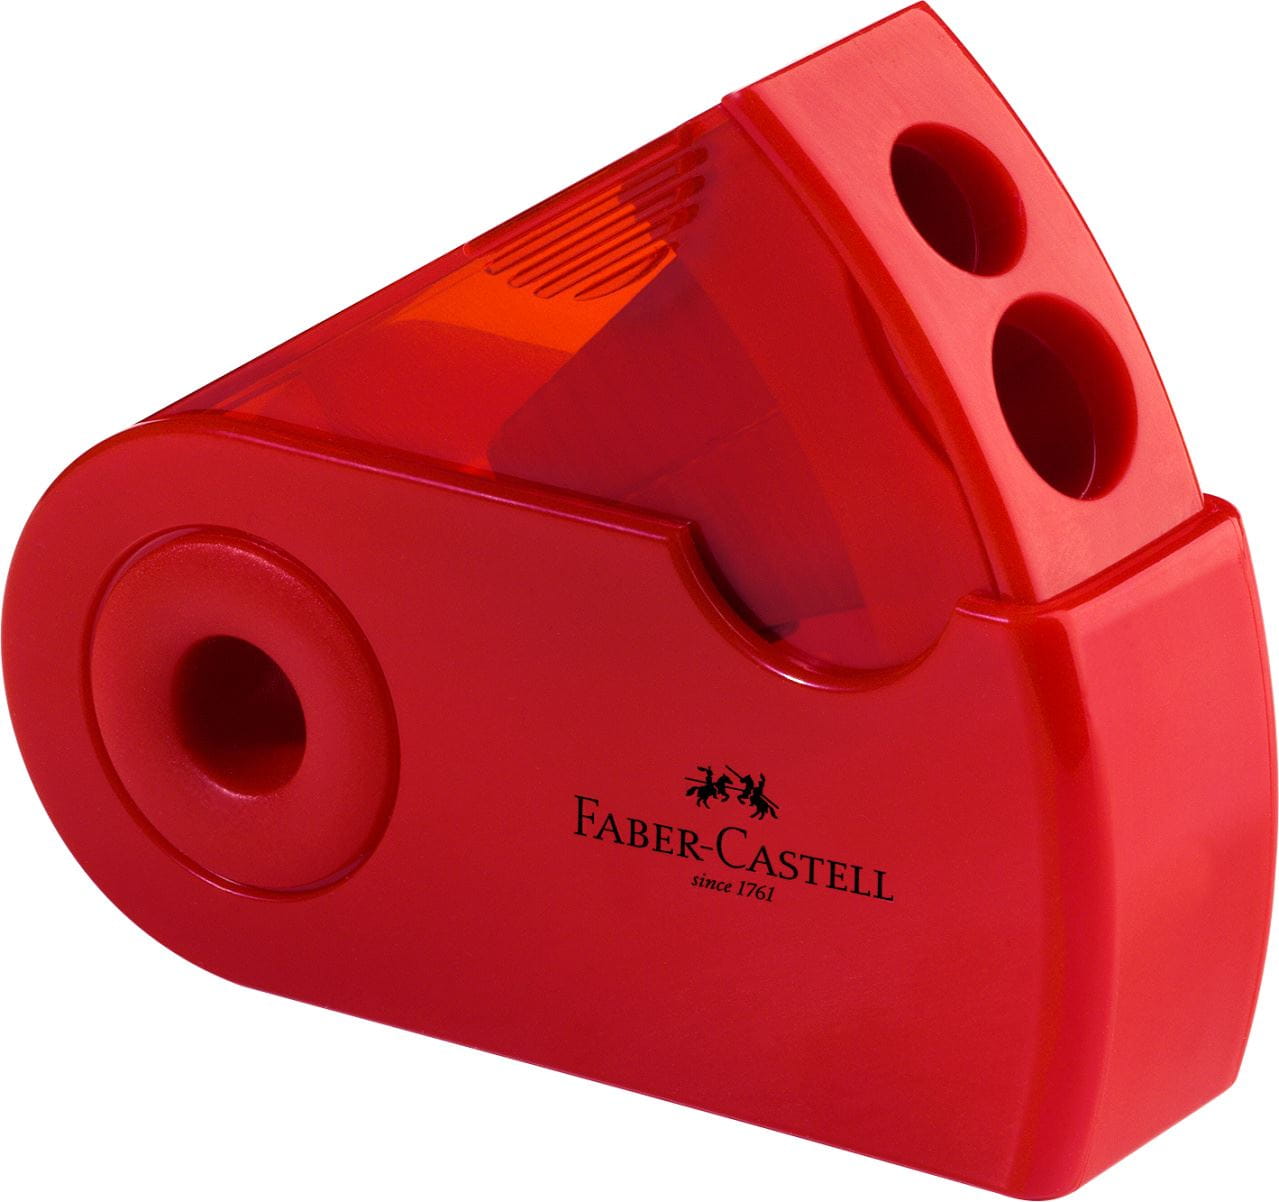 Faber-Castell - Taille-crayon 2 usages Sleeve rouge/bleu